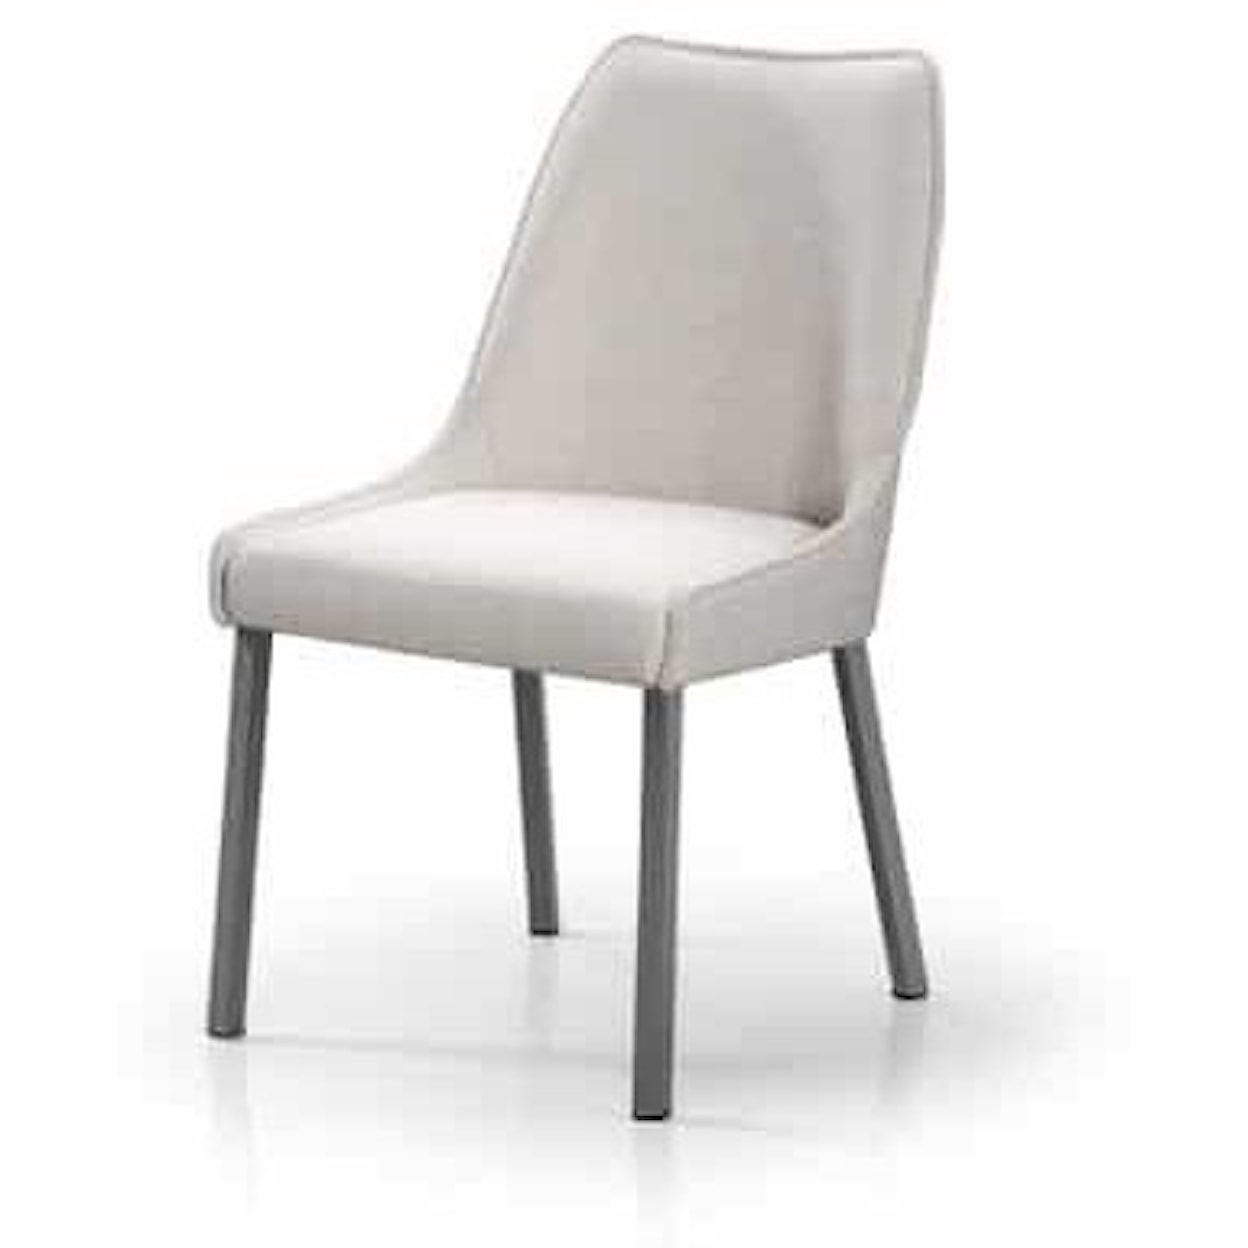 Trica Olivia Side Chair